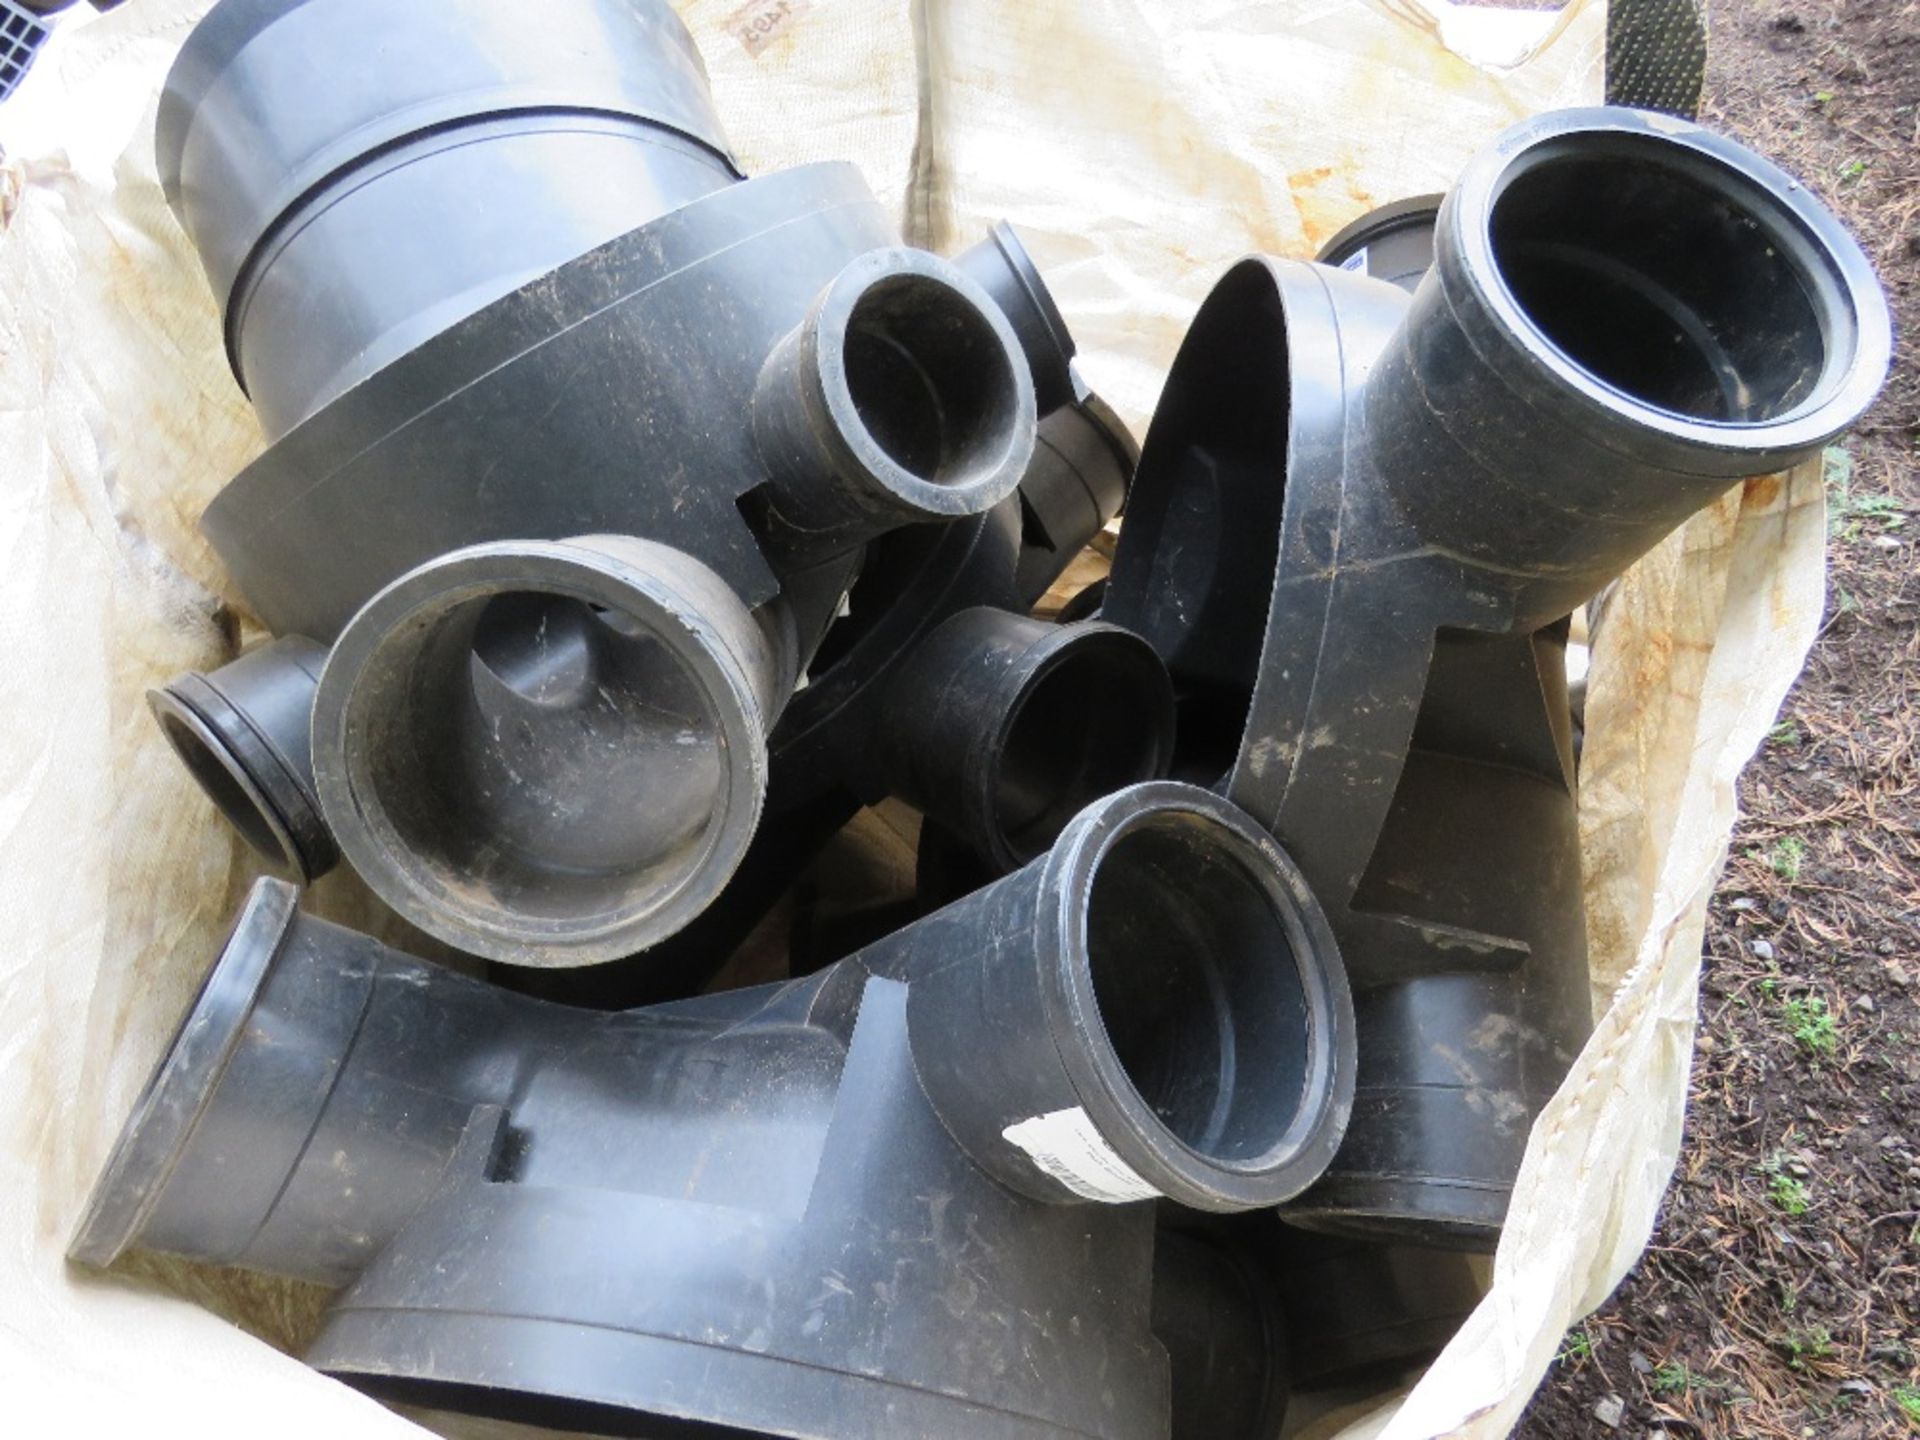 2 X BULK BAGS CONTAINING ASSORTED BLACK PLASTIC DRAINAGE AND MANHOLE FITTINGS . DIRECT FROM COMPANY - Image 3 of 5